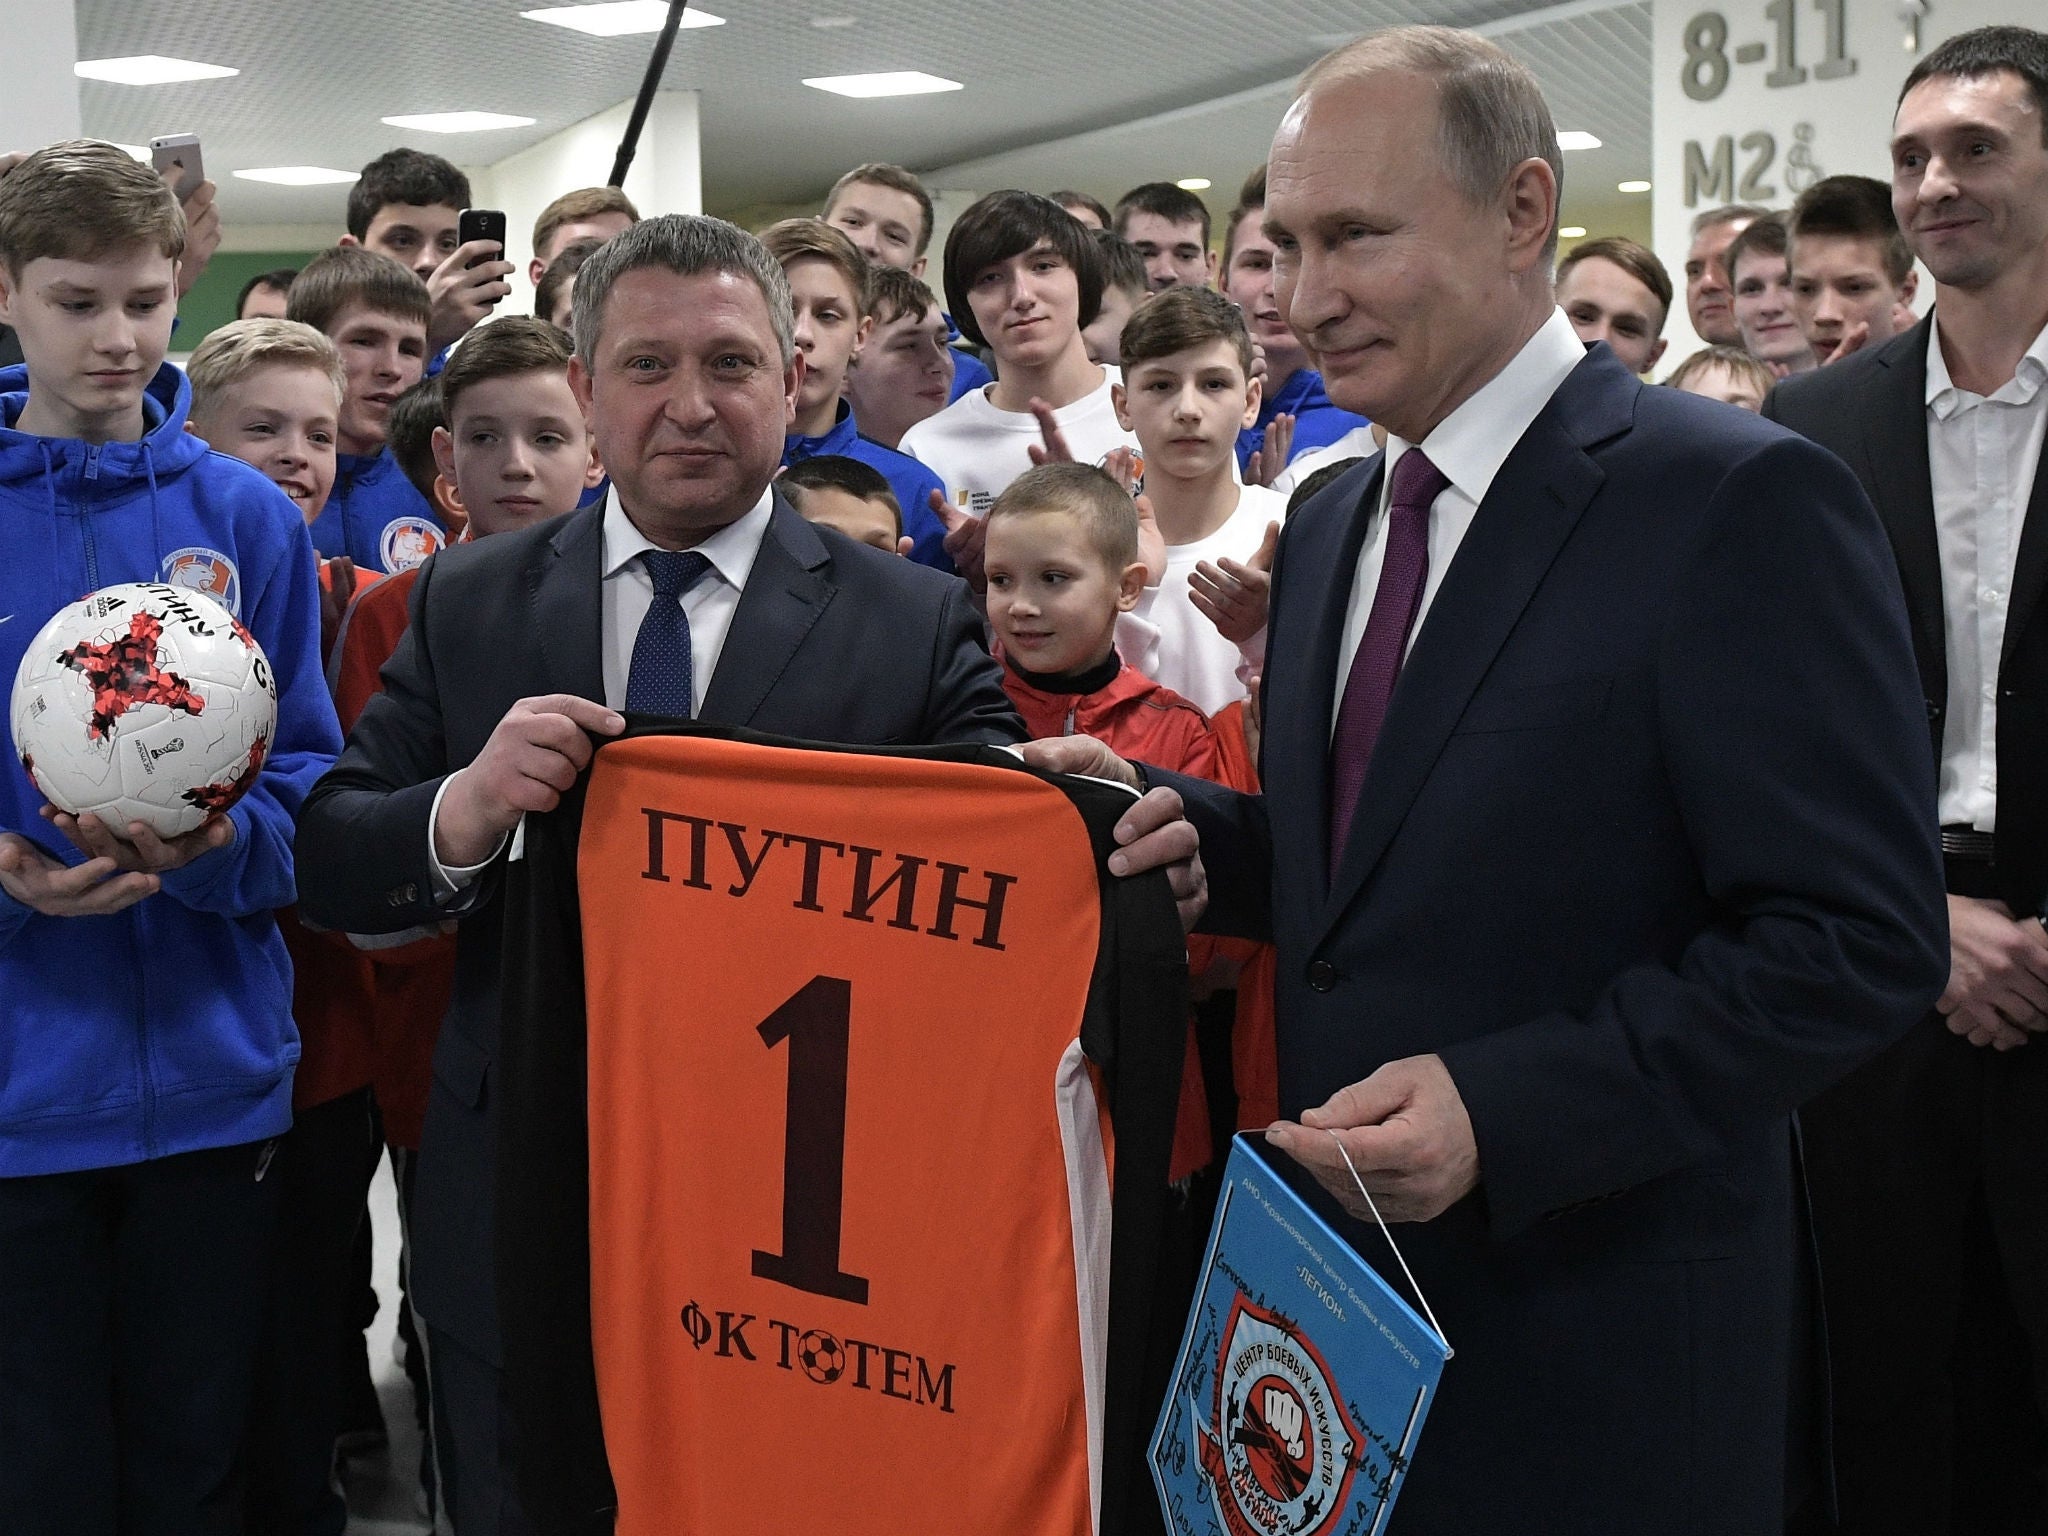 Russian President Vladimir Putin, right, holds a T-shirt with his name as he and General Director Sergei Gorbunov, second left, pose for a photo with FC Totem football team's players in Krasnoyarsk